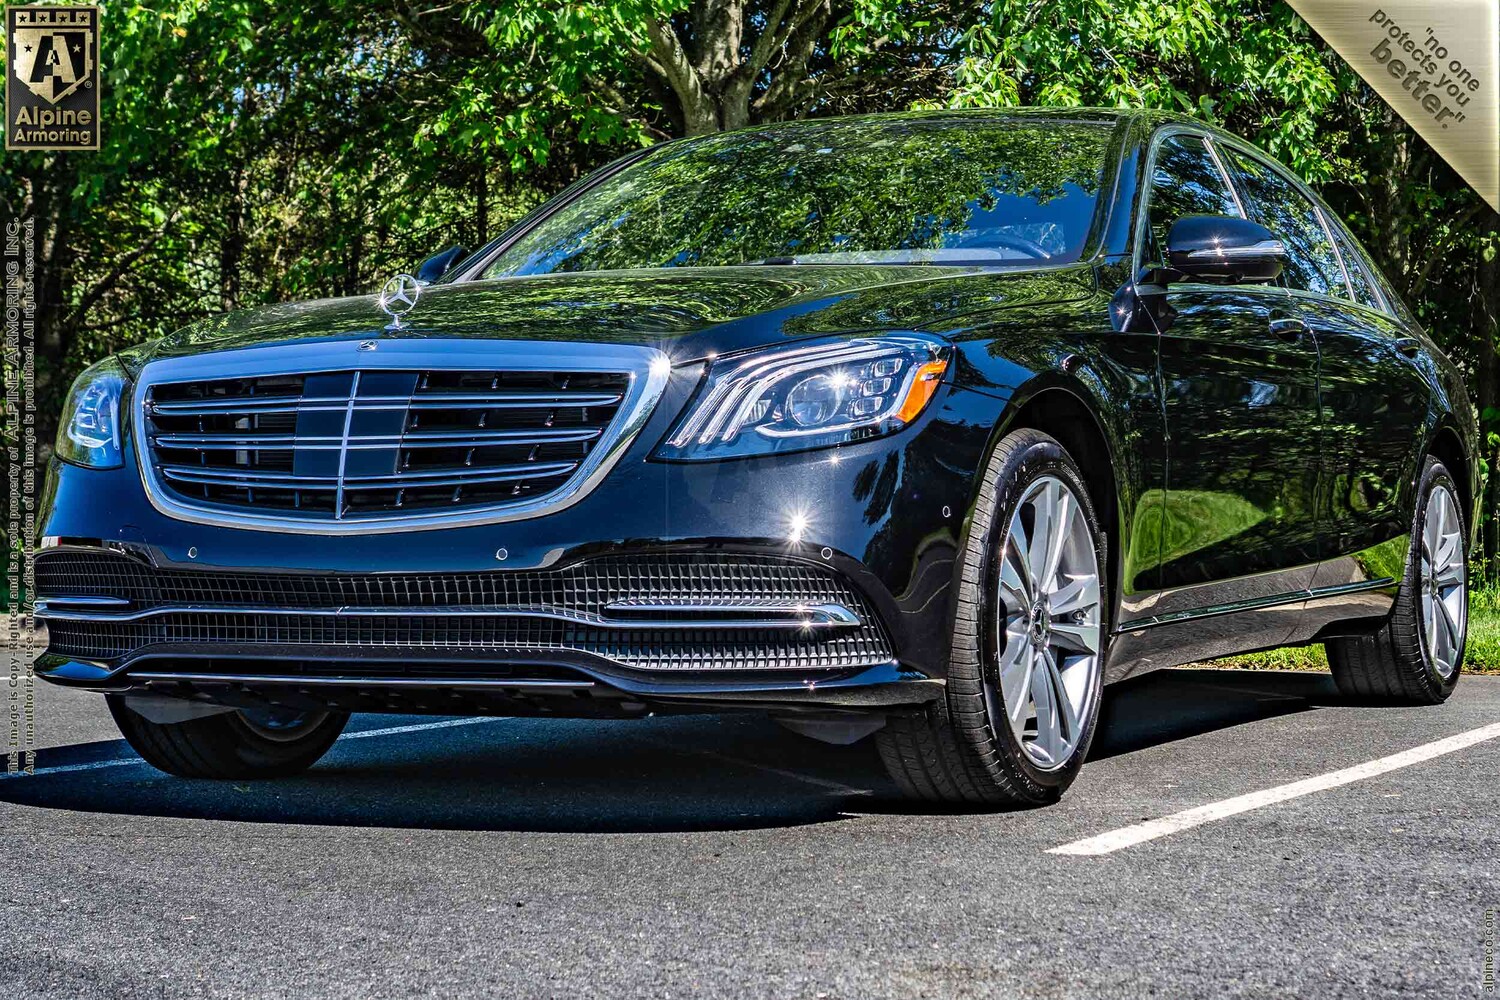 New Inventory armored Mercedes-Benz S560 4MATIC Level A9/B6+  Exterior & Interior Images VIN:6842